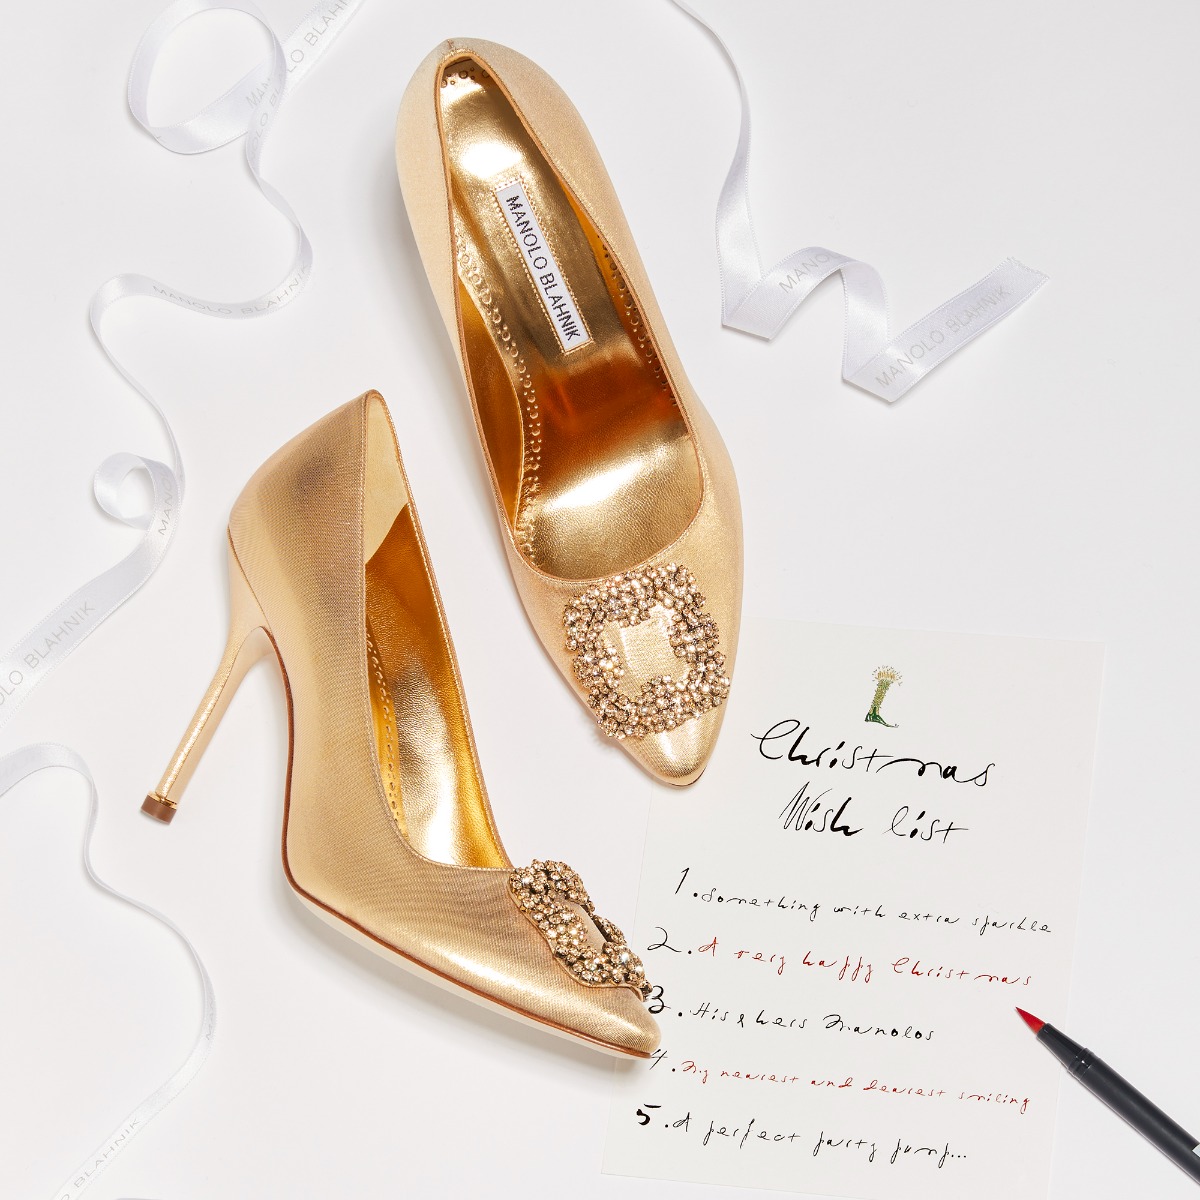 A Christmas wish list laying next to the gold collection Hangisi pumps.